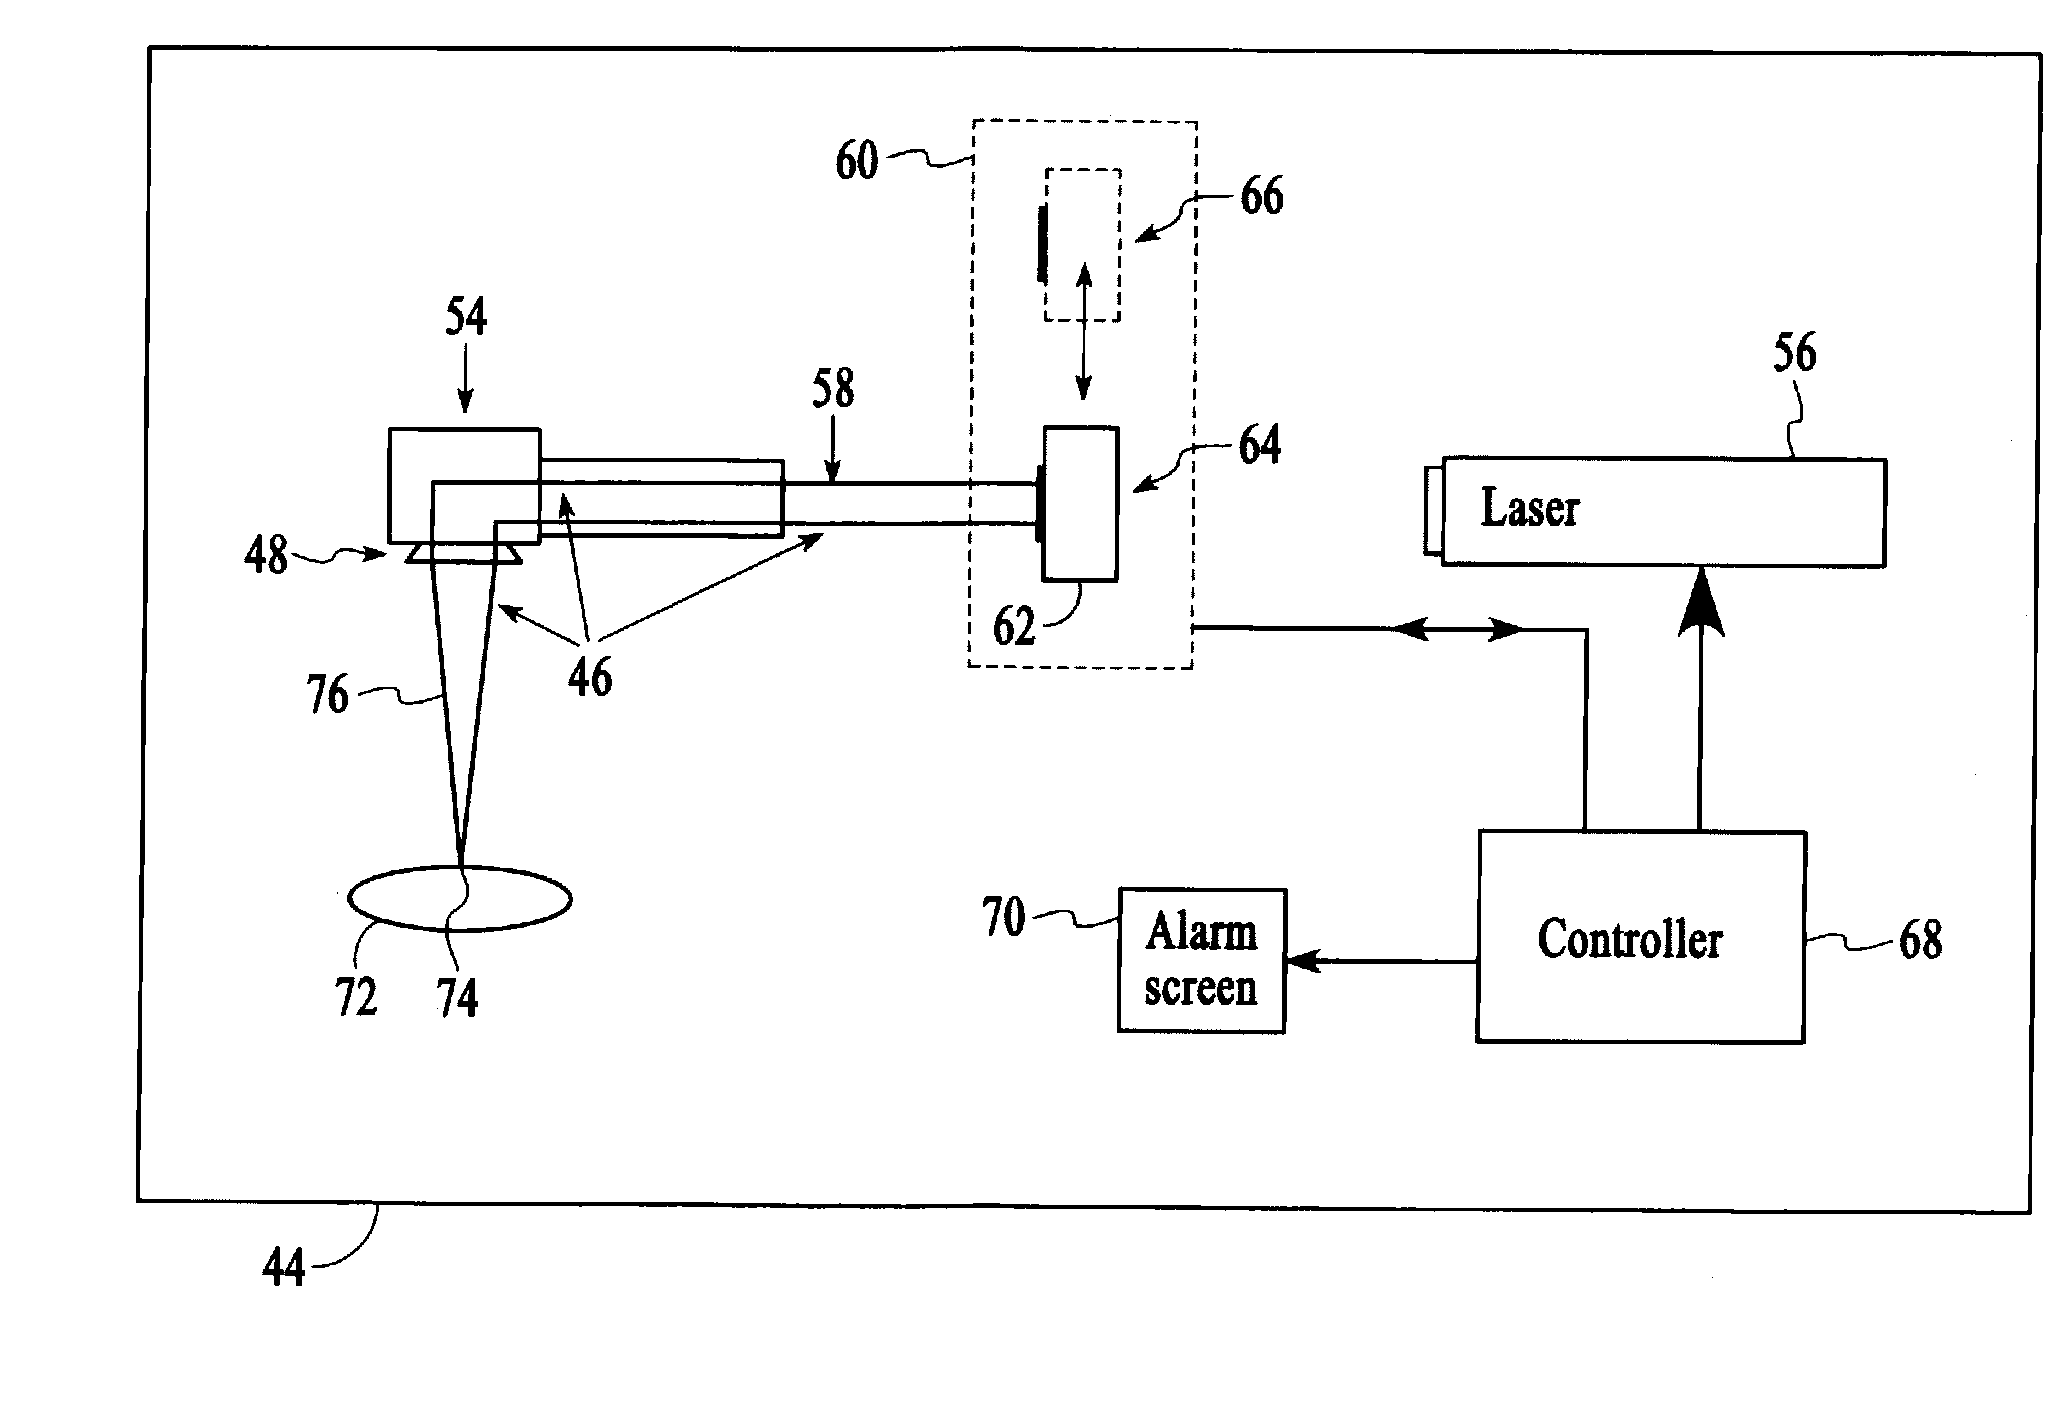 Laser safety system with beam steering